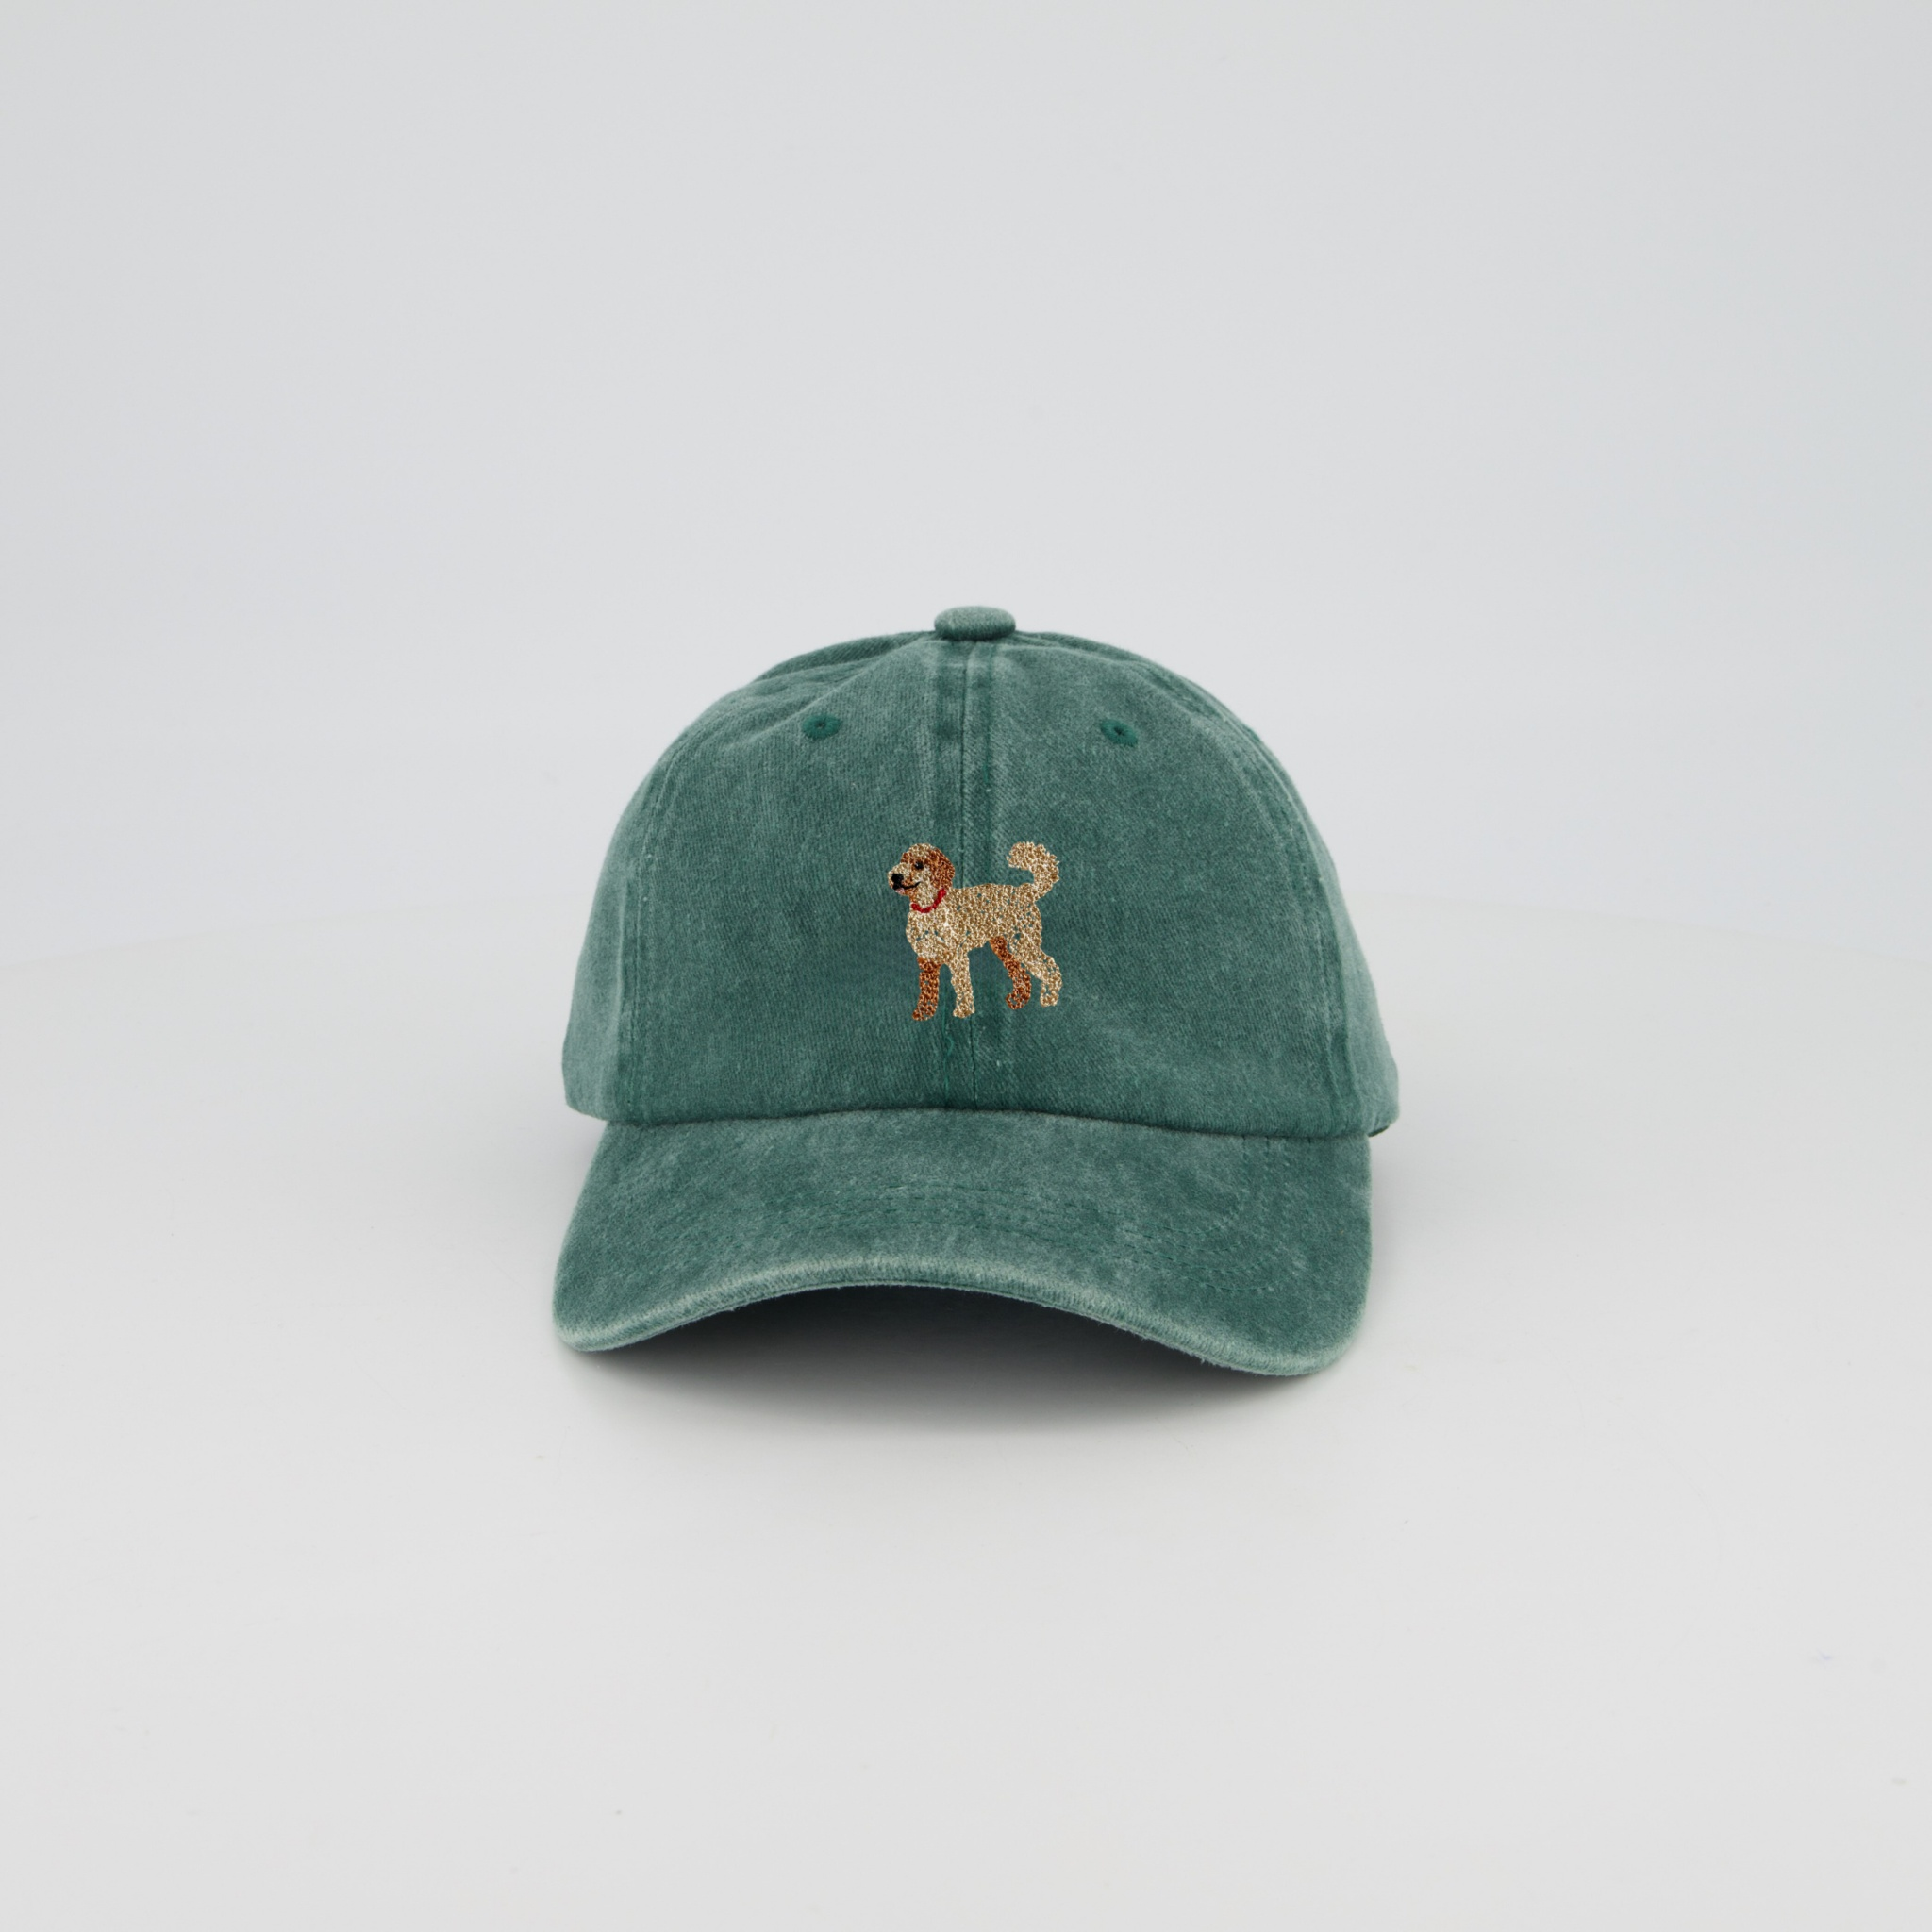 Vintage Green Personalised Hat with Hand-drawn Labradoodle Embroidery Design 